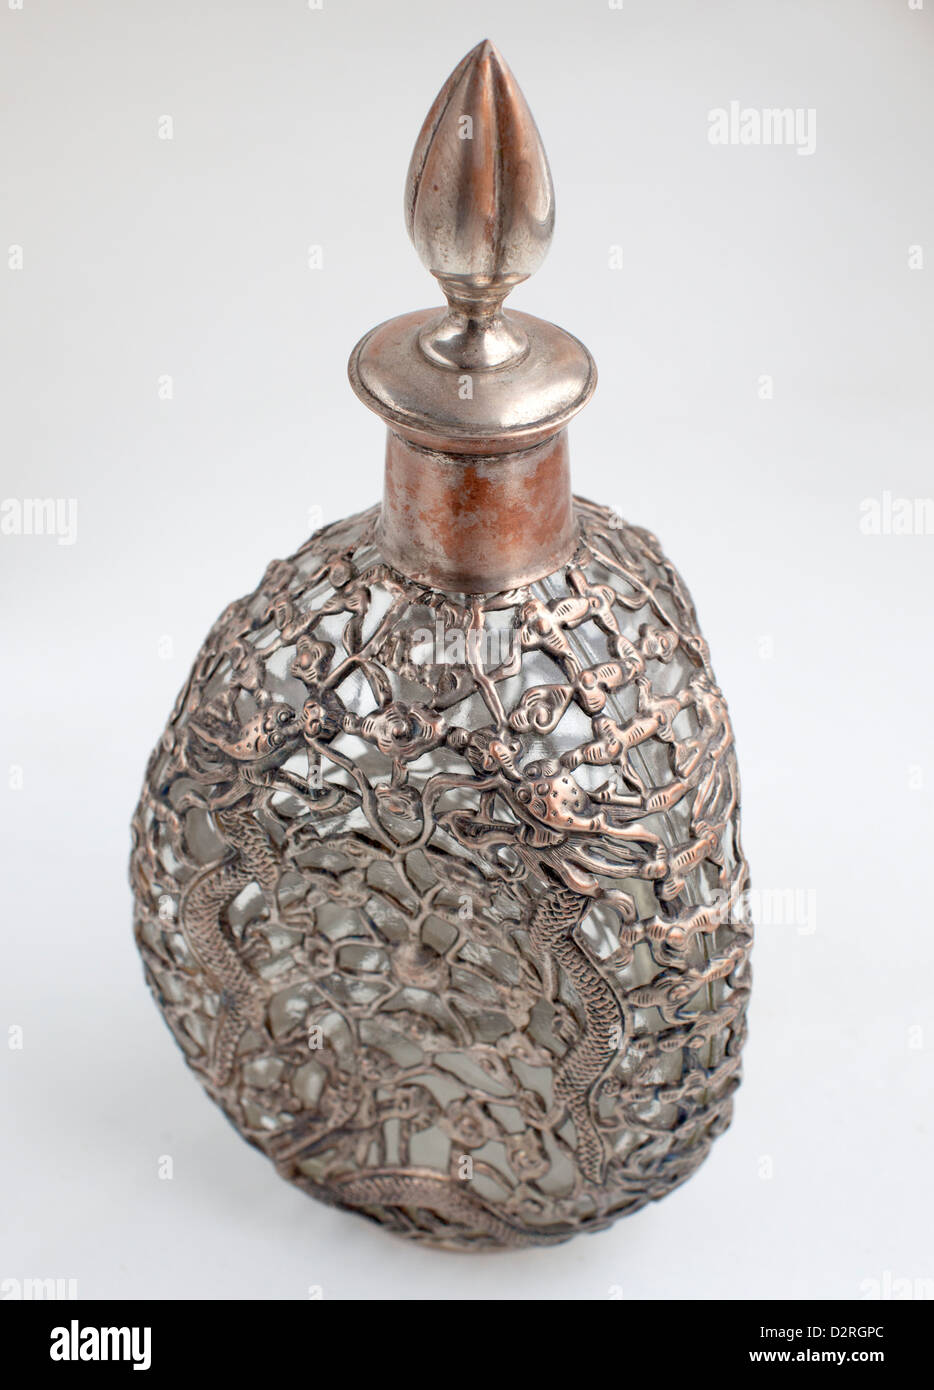 An antiques silver vintage old jug on white background Stock Photo